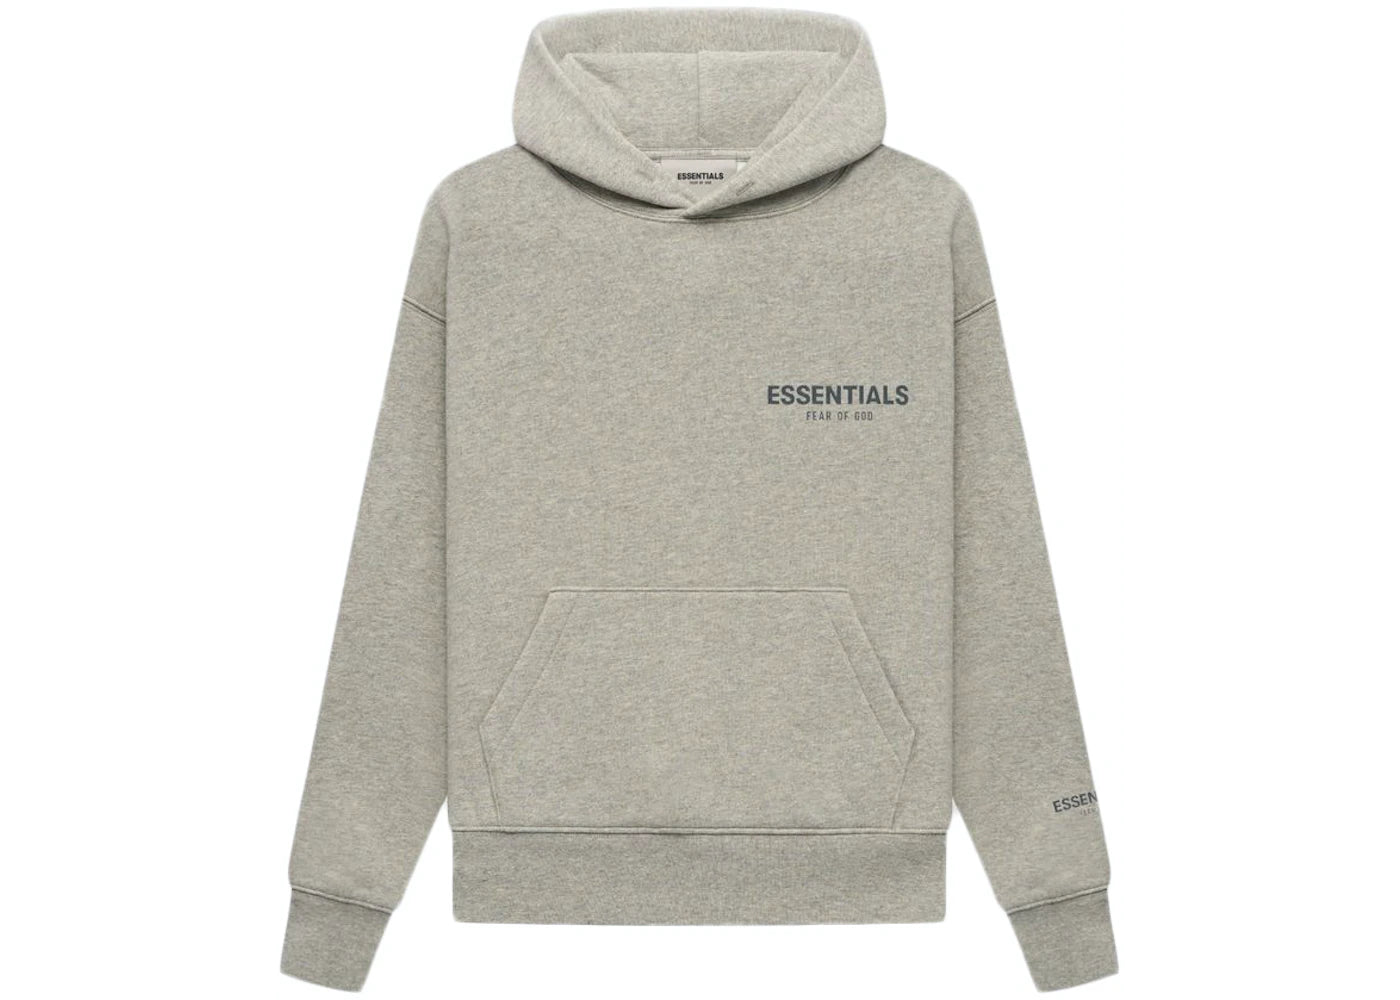 ESSENTIALS CORE COLLECTION PULLOVER HOODIE FW21 KIDS "OATMEAL"